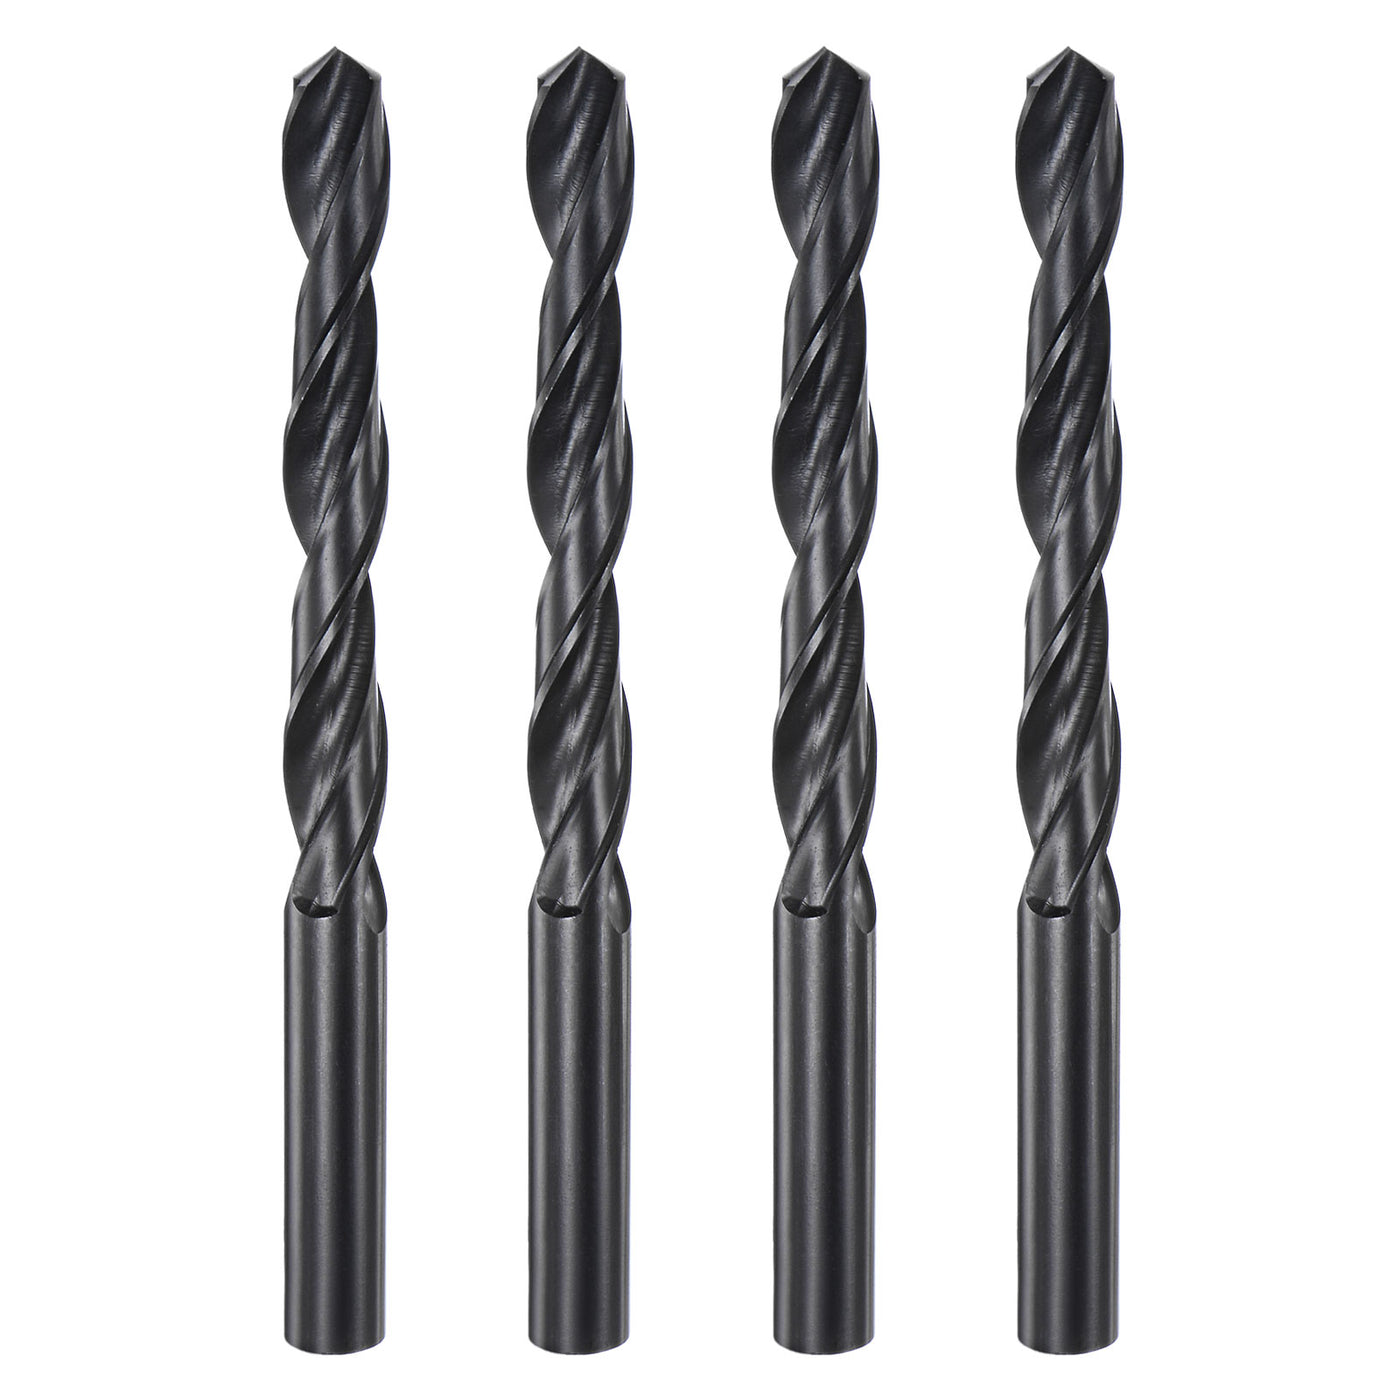 uxcell Uxcell High Speed Steel Twist Drill Bit, 10.5mm Fully Ground Black Oxide 130mm Long 4Pc